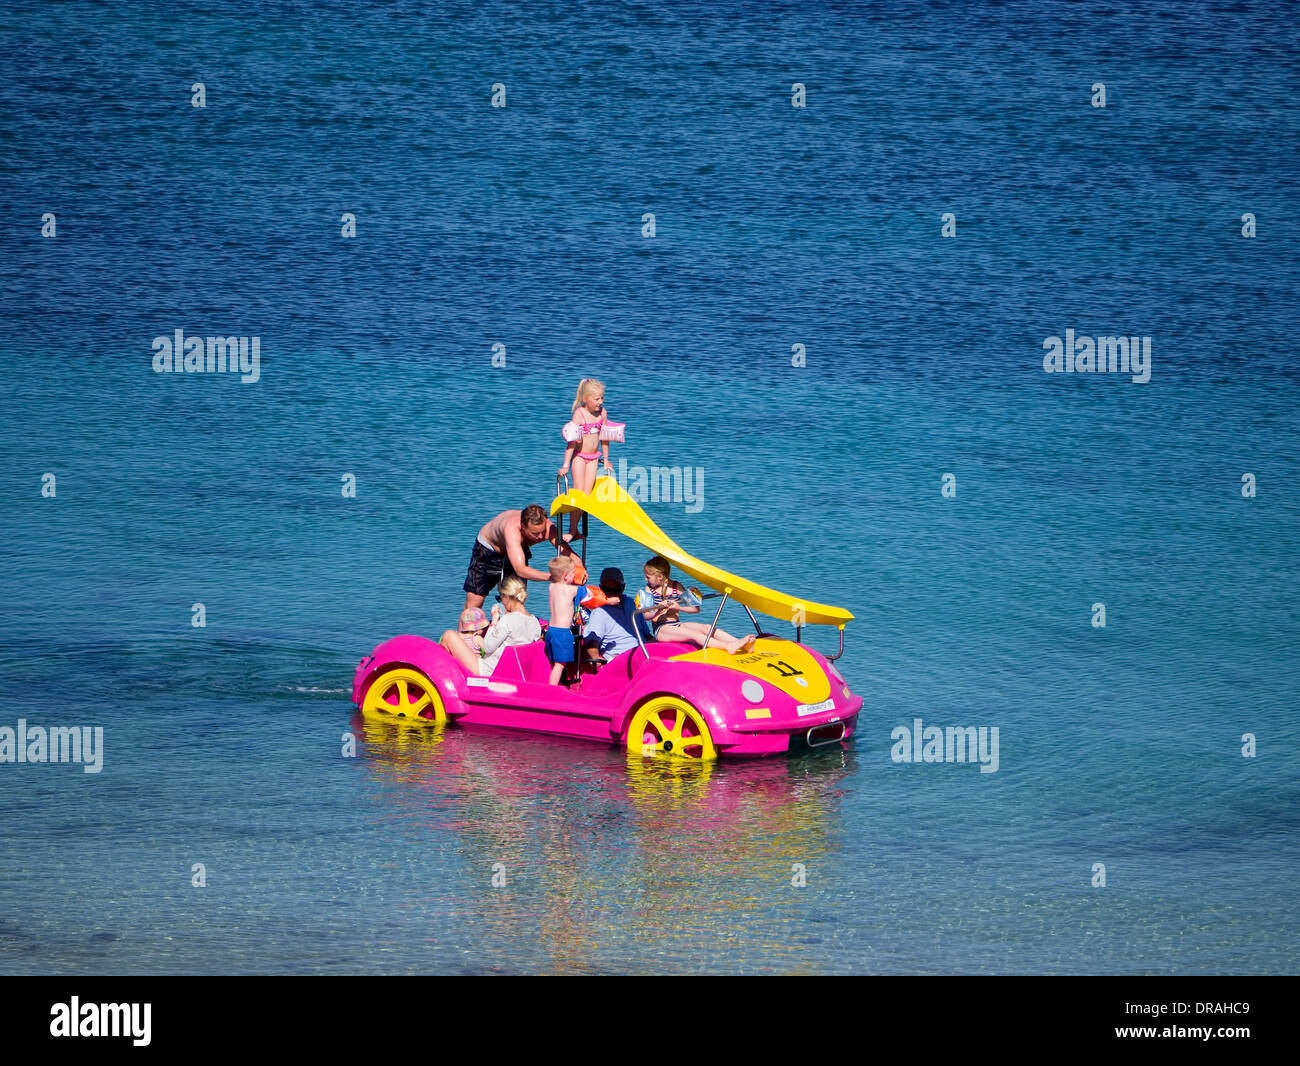 Family fun on a pedalo in Spain Stock Photo